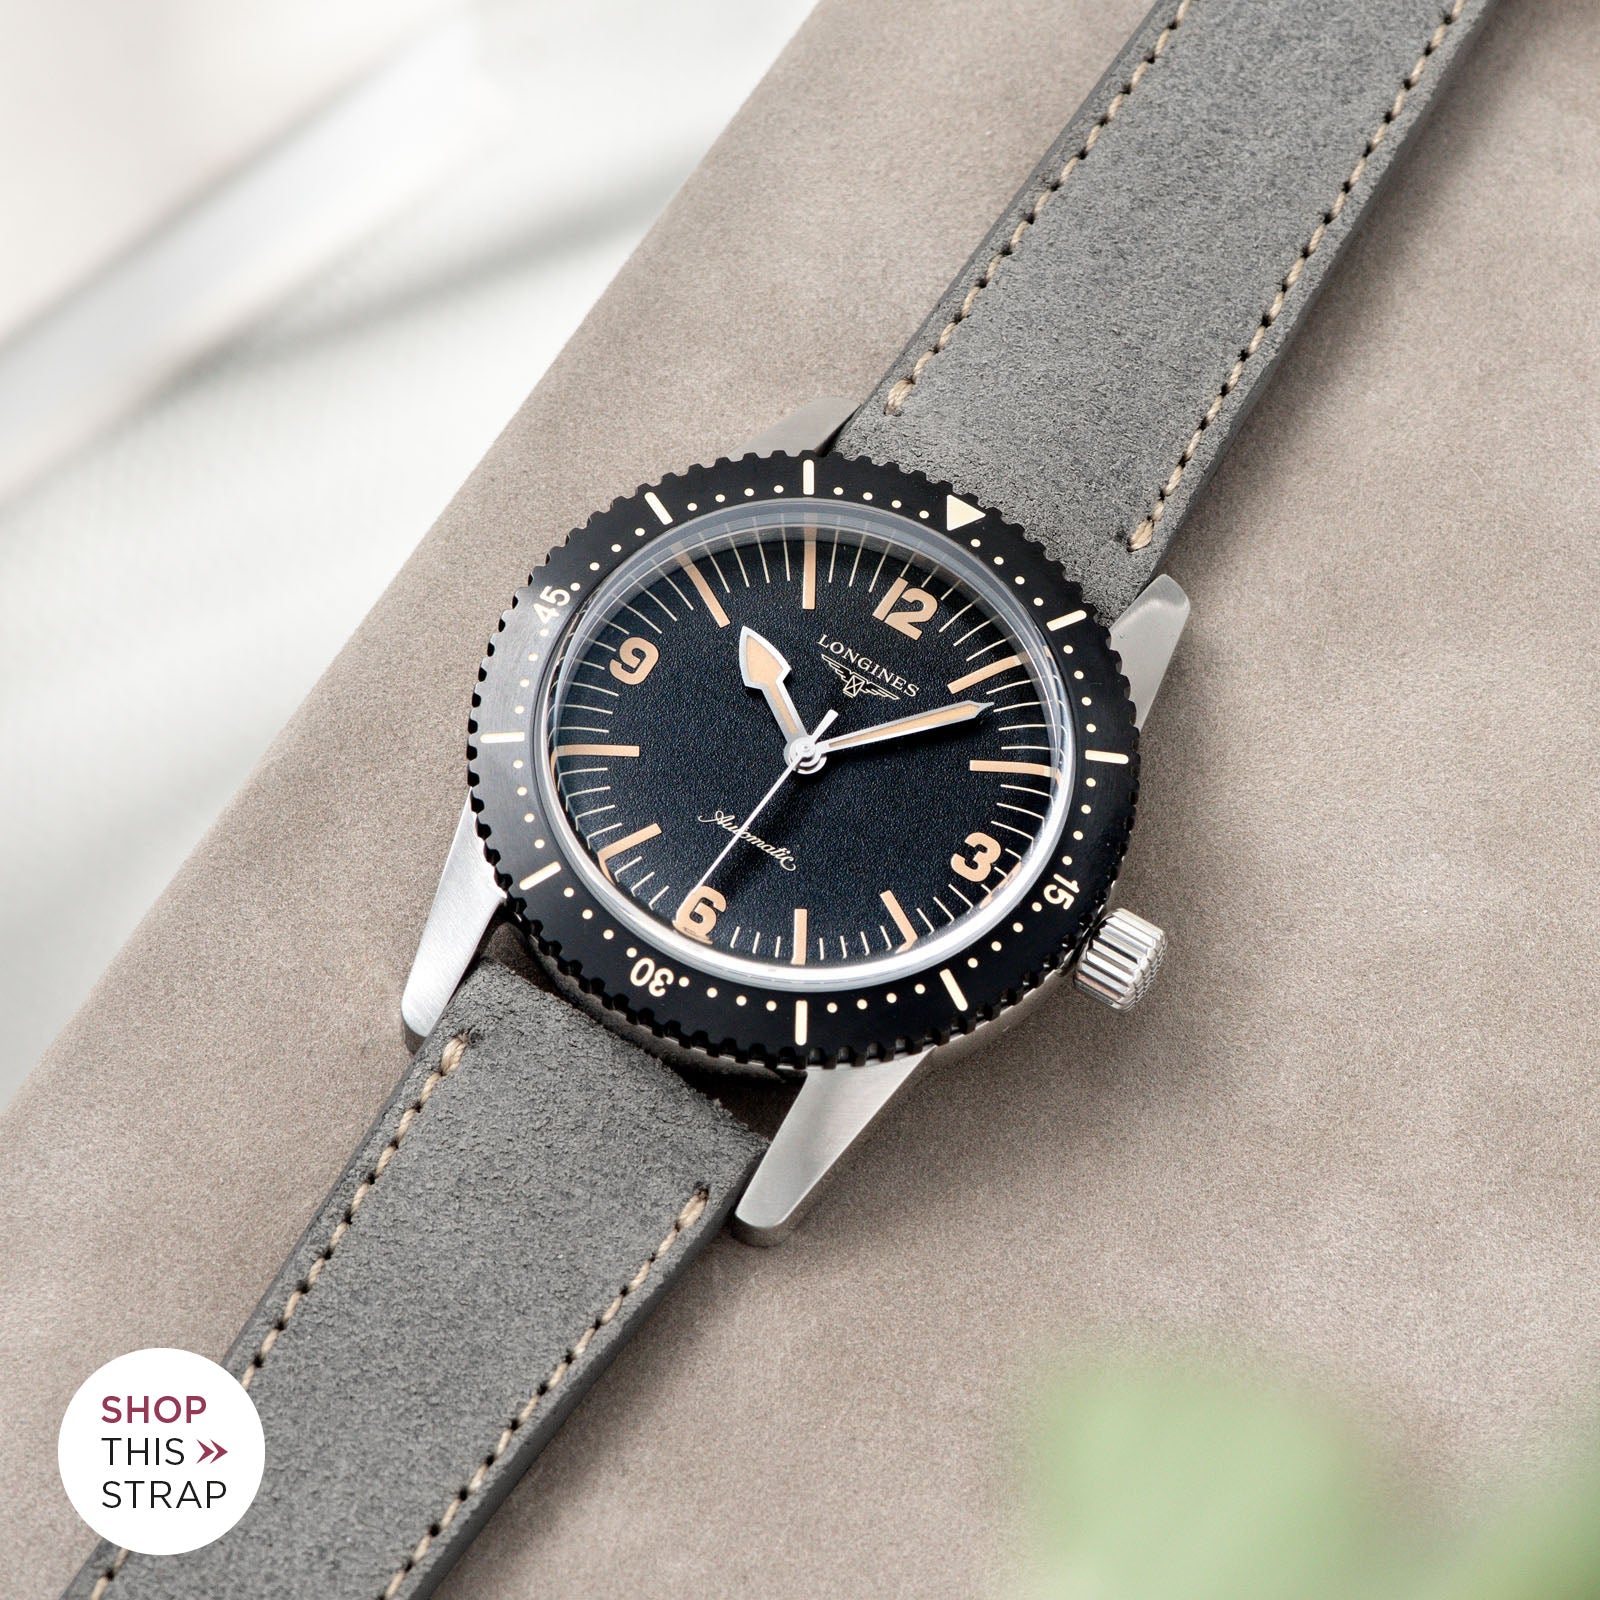 Bulang and Sons_Strap Guide_Longines Skin Diver_Refined Rugged Grey Silky Suede Leather Watch Strap